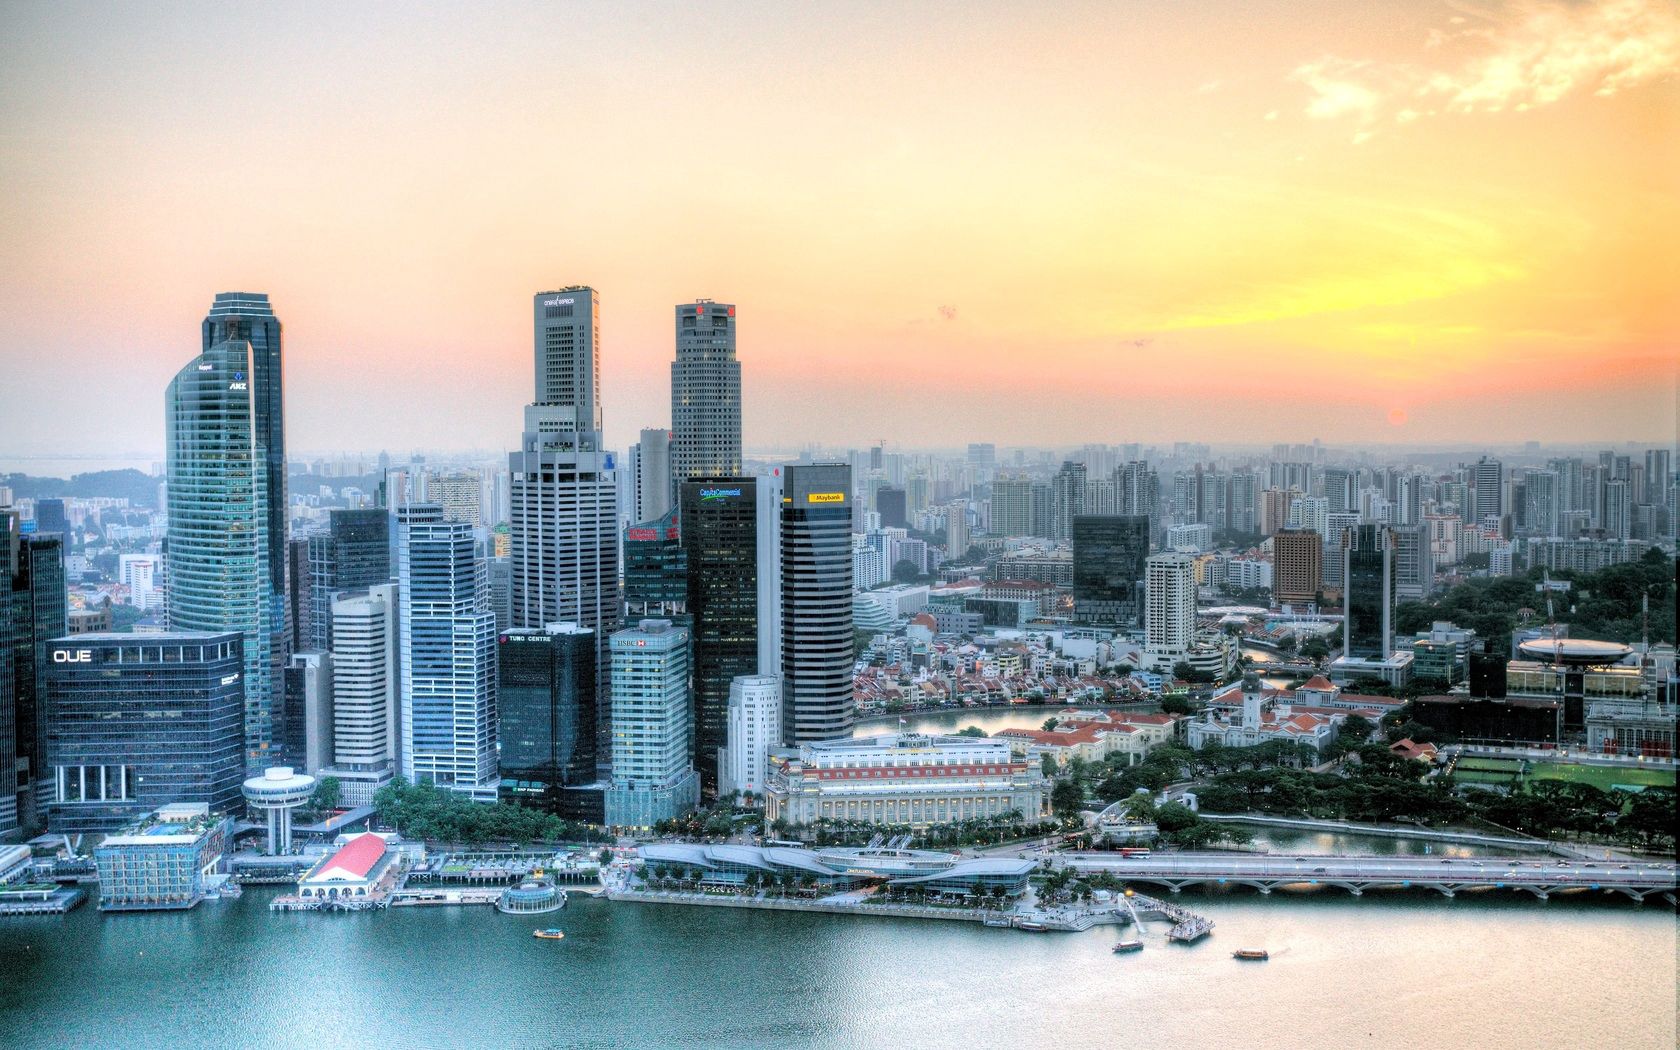 singapore, cities, sunset, skyscrapers, hdr images